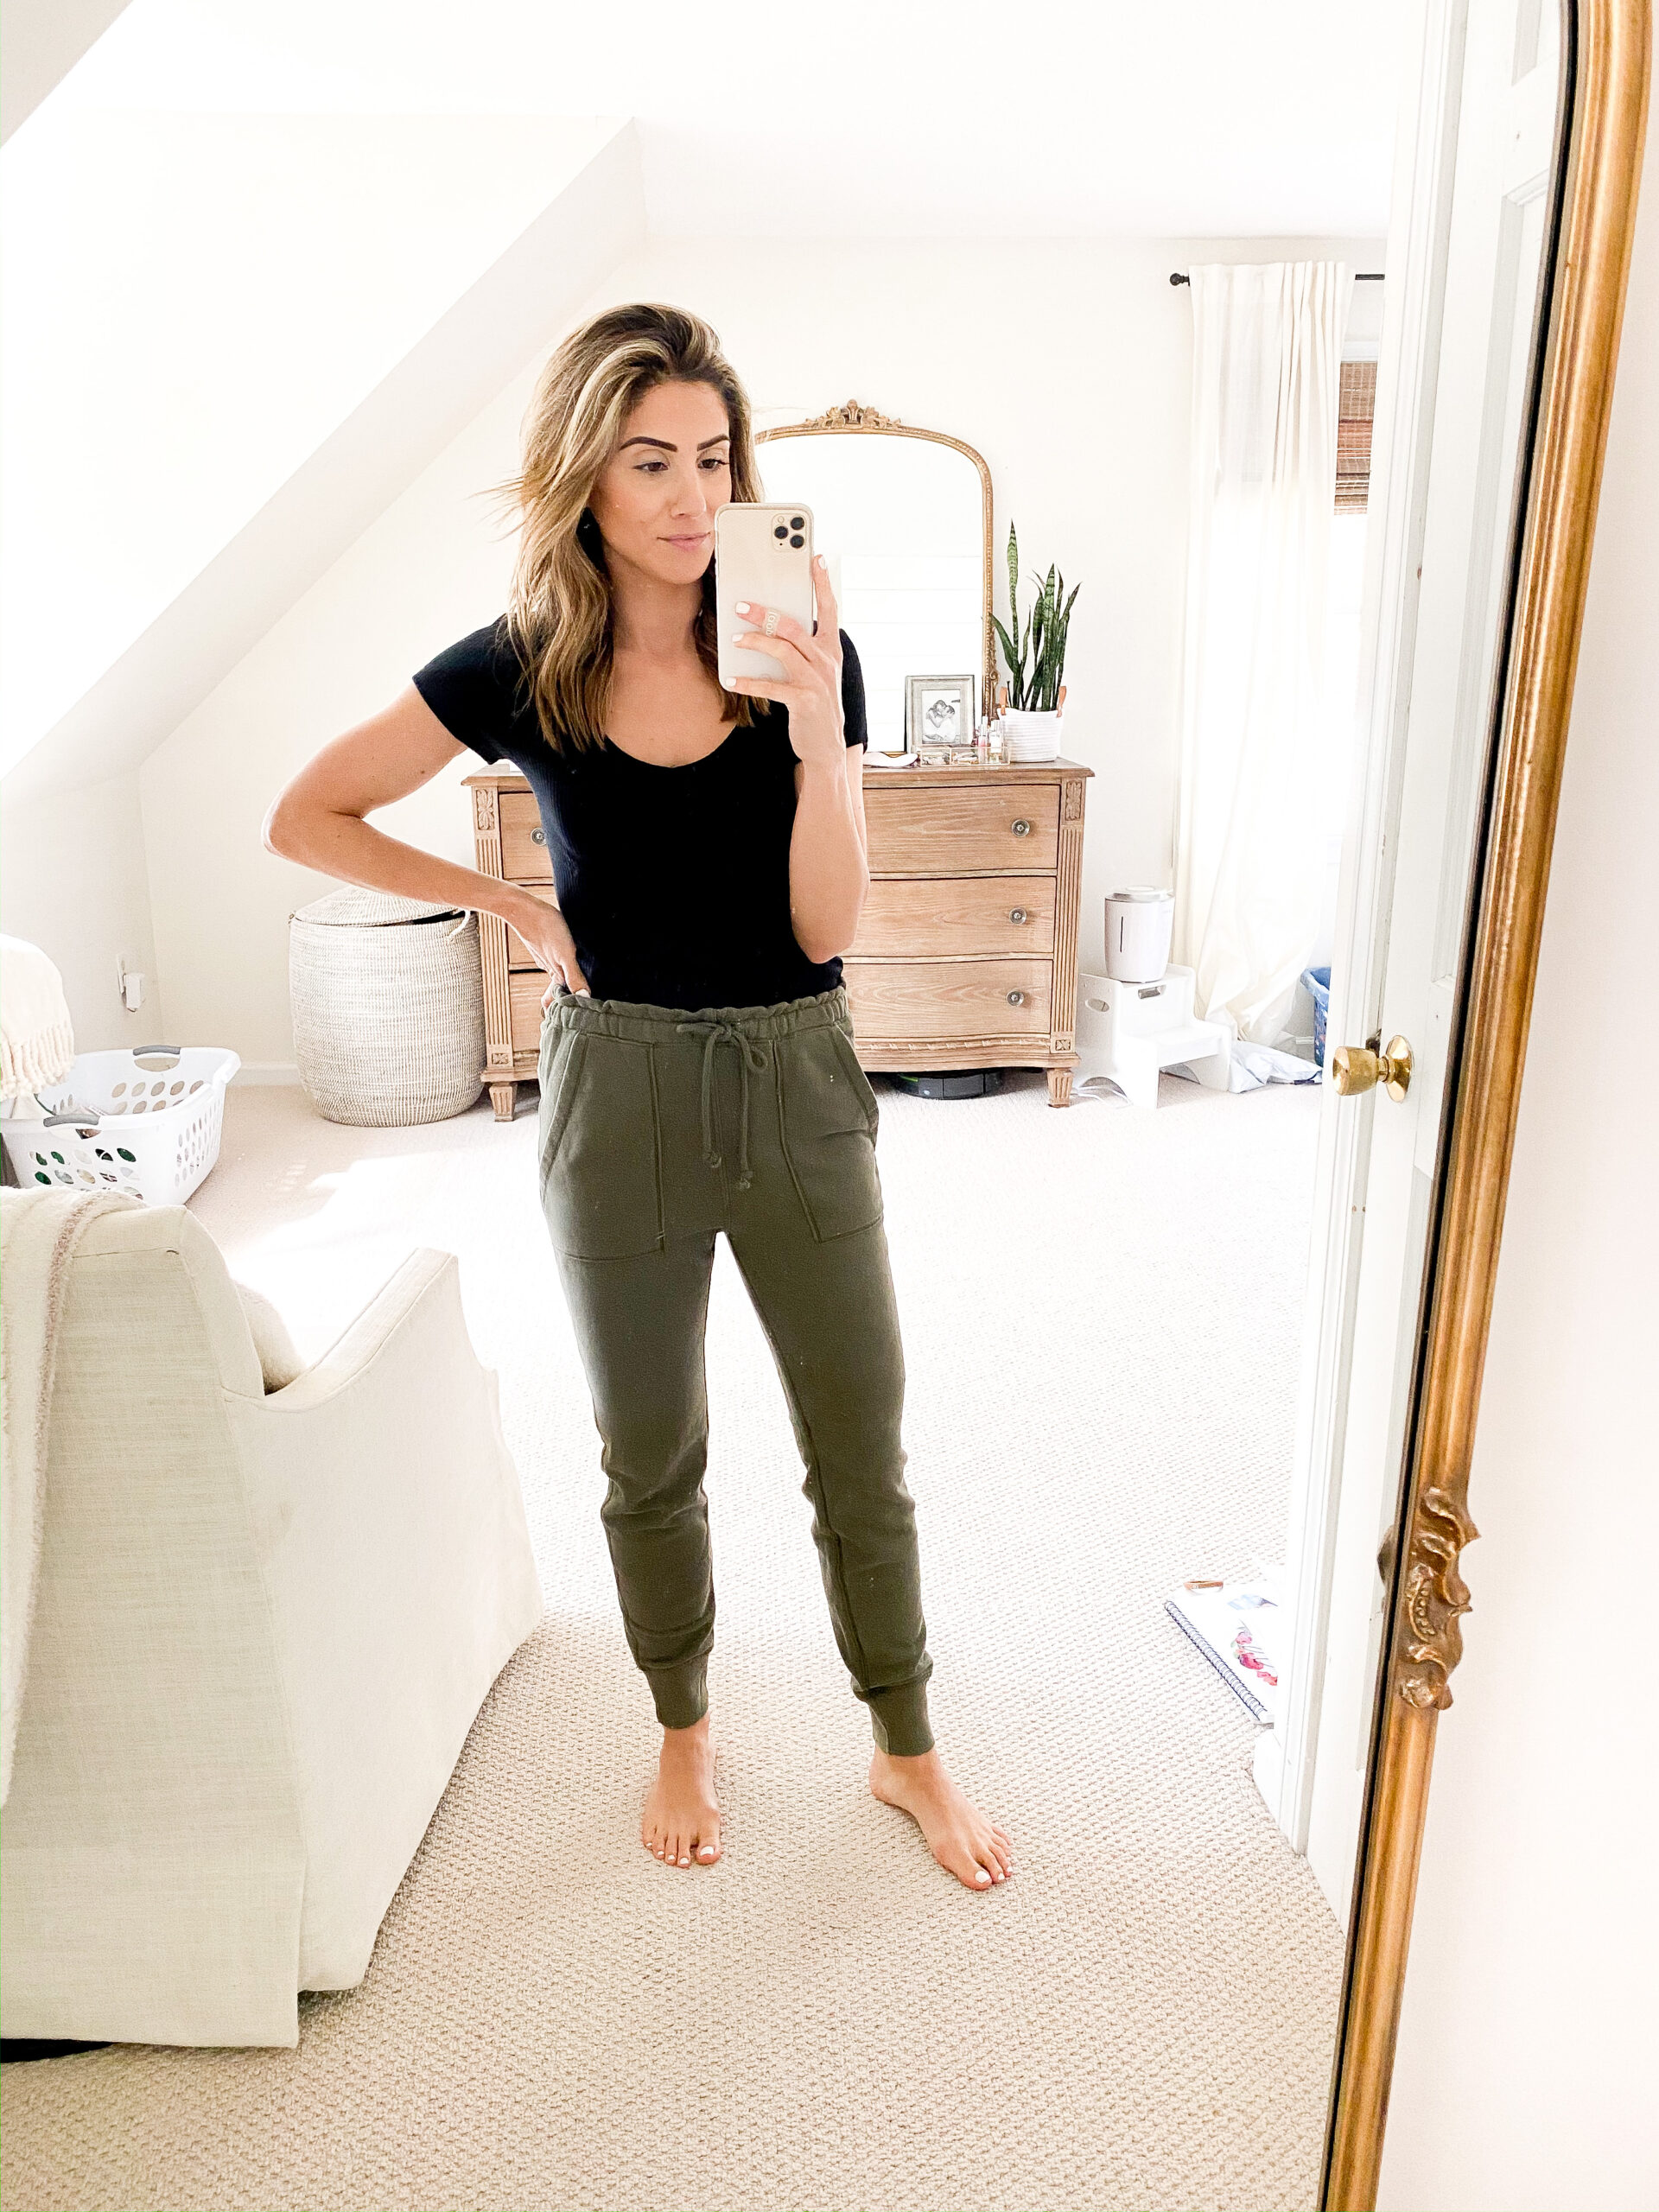 Connecticut life and style blogger Lauren McBride shares a loungewear try on featuring comfortable sweatshirts, sweatpants, joggers, and more.